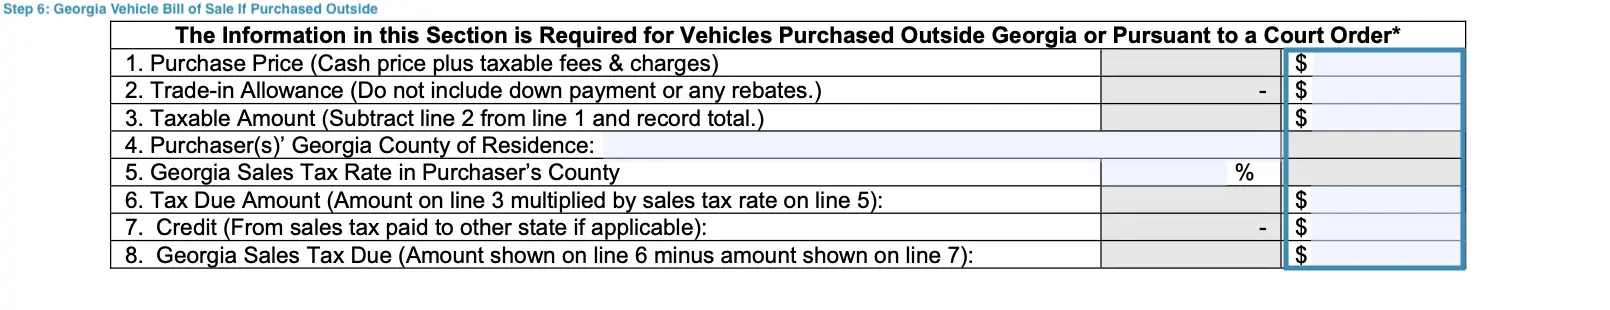 Section for specifying provisions of car bill of sale Georgia if the vehicle is purchased outside